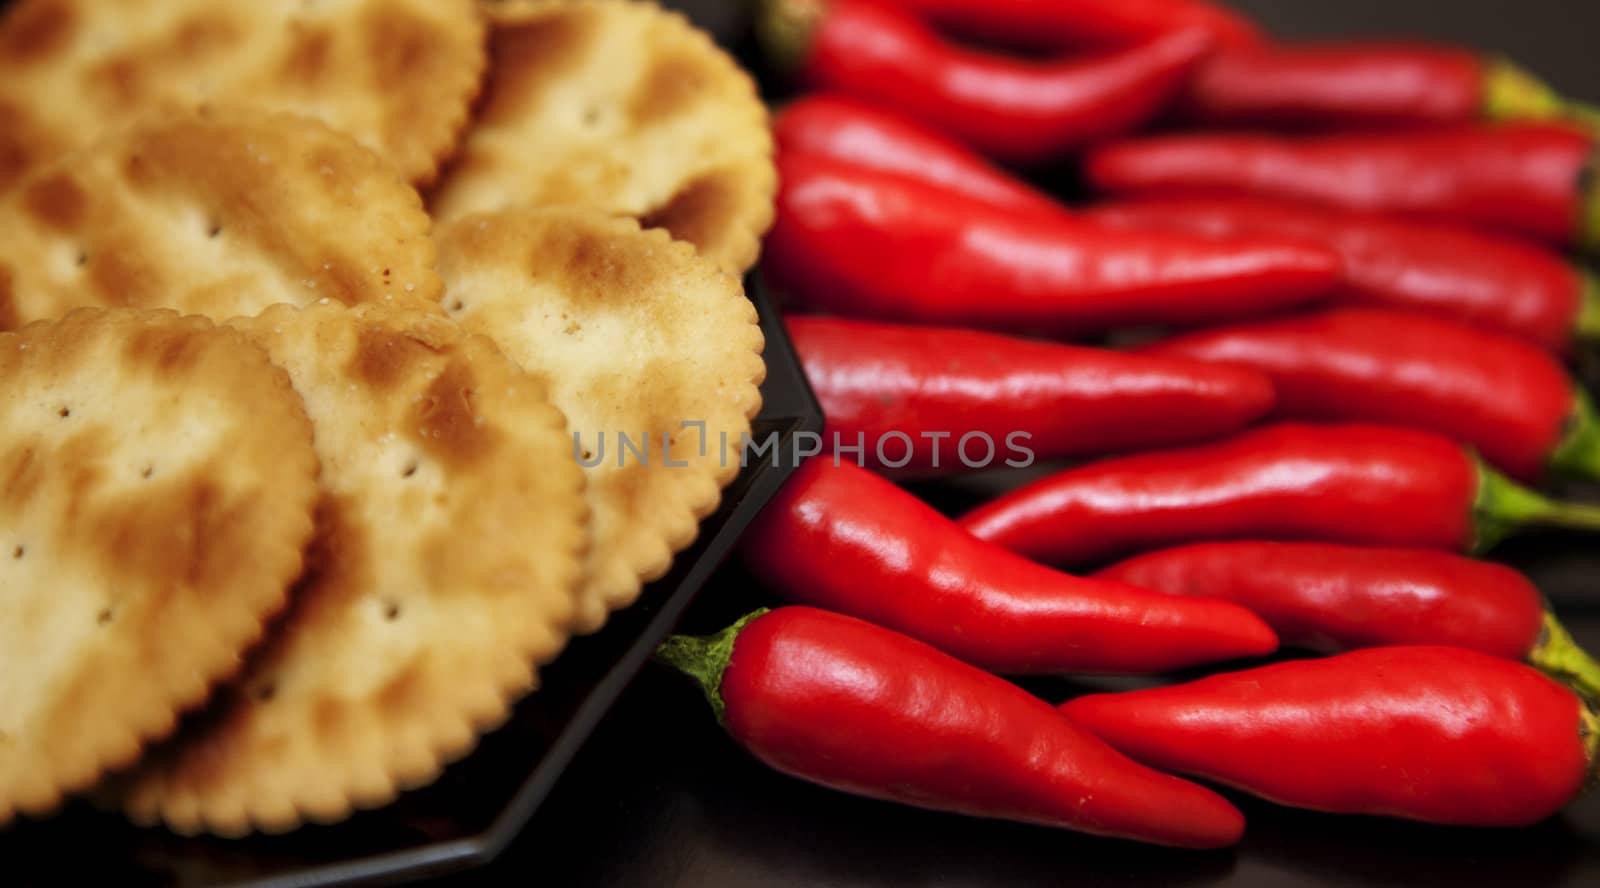 A plate of crackers next to a bunch of fresh chillies against black.